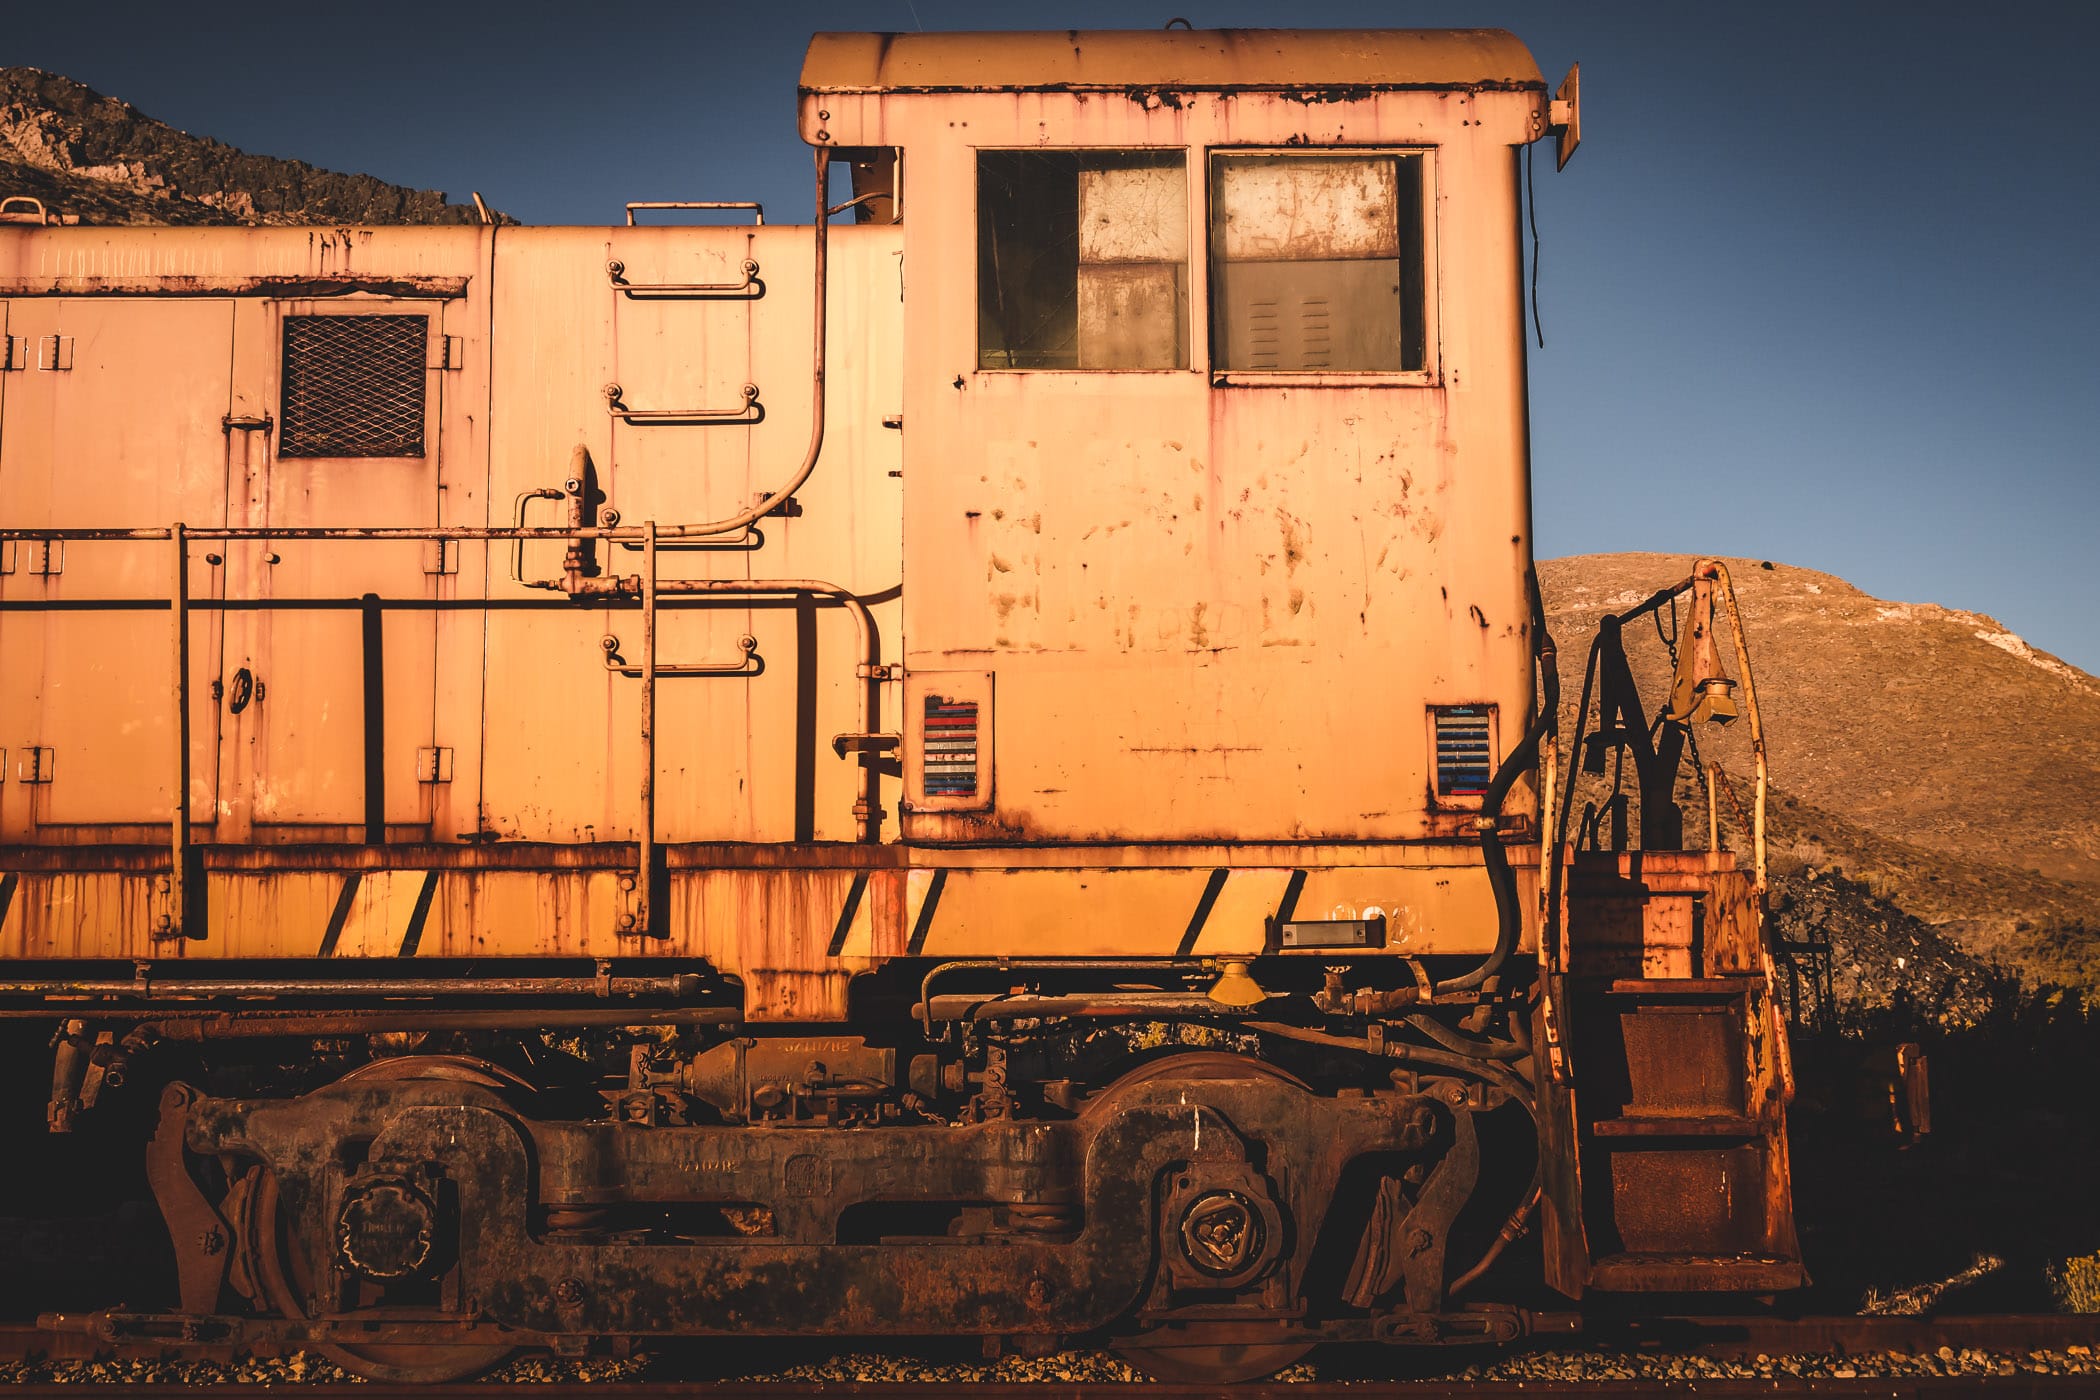 Detail of a train engine abandoned in the desert near Magna, Utah.